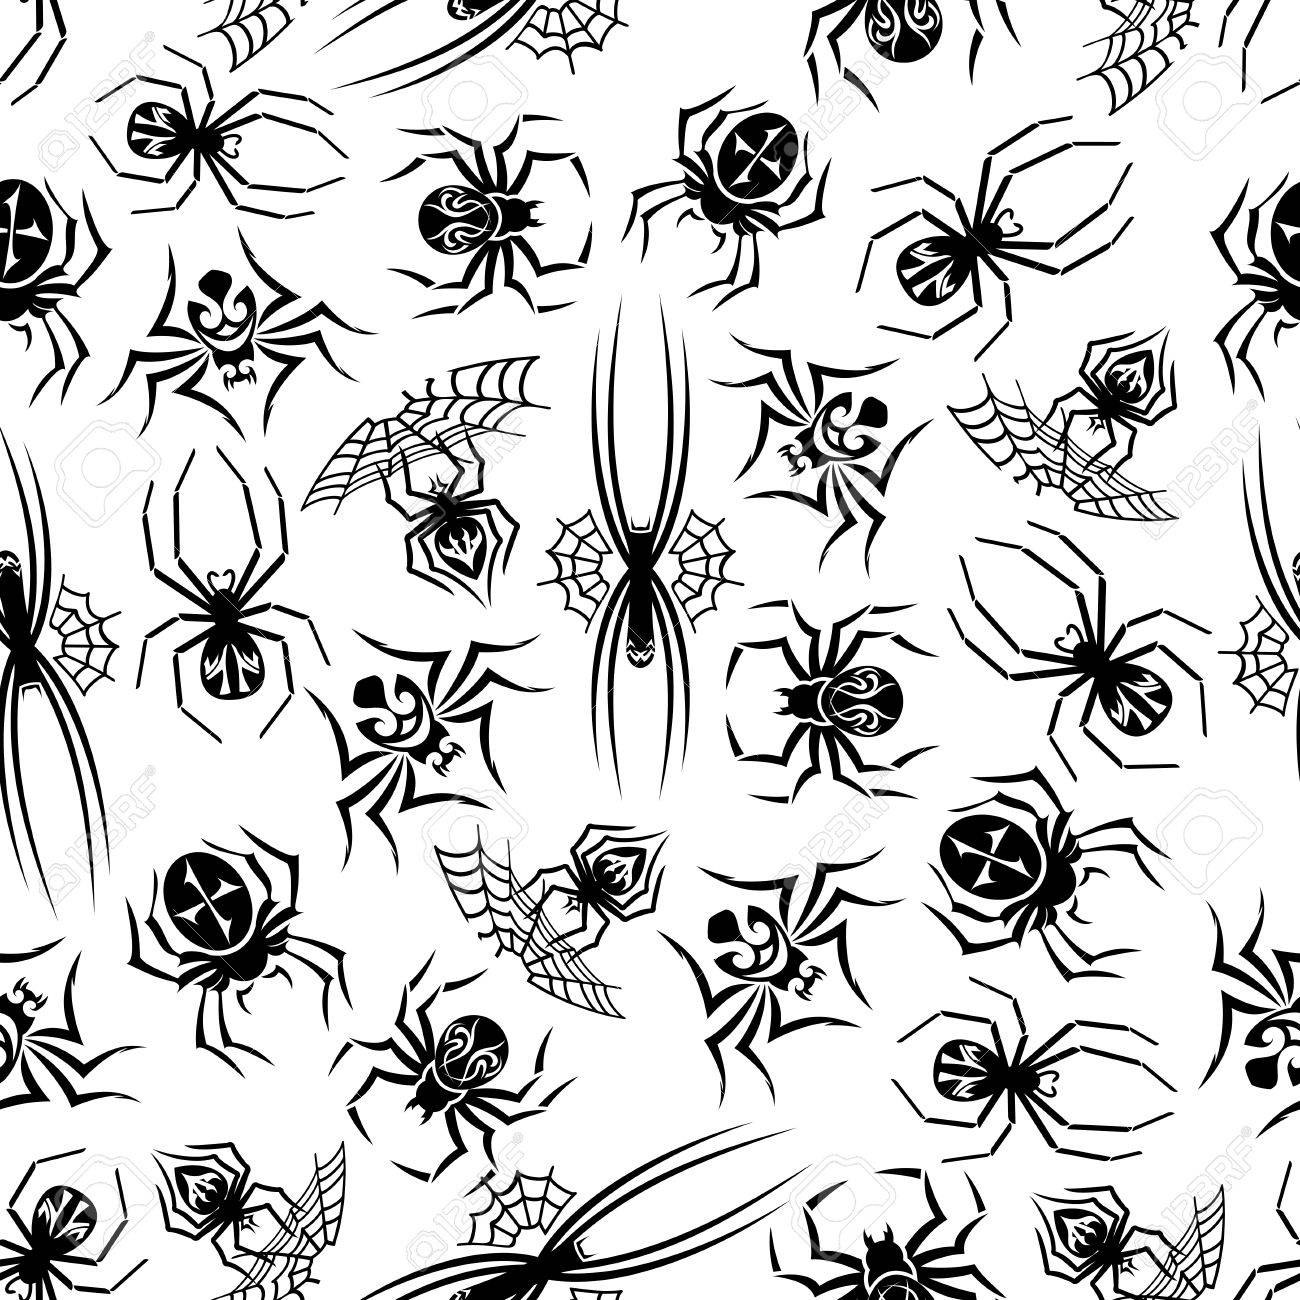 61439629-black-spiders-seamless-background-wallpaper-with-vector-pattern-icons-of-tarantula-spider-web-hallow.jpg